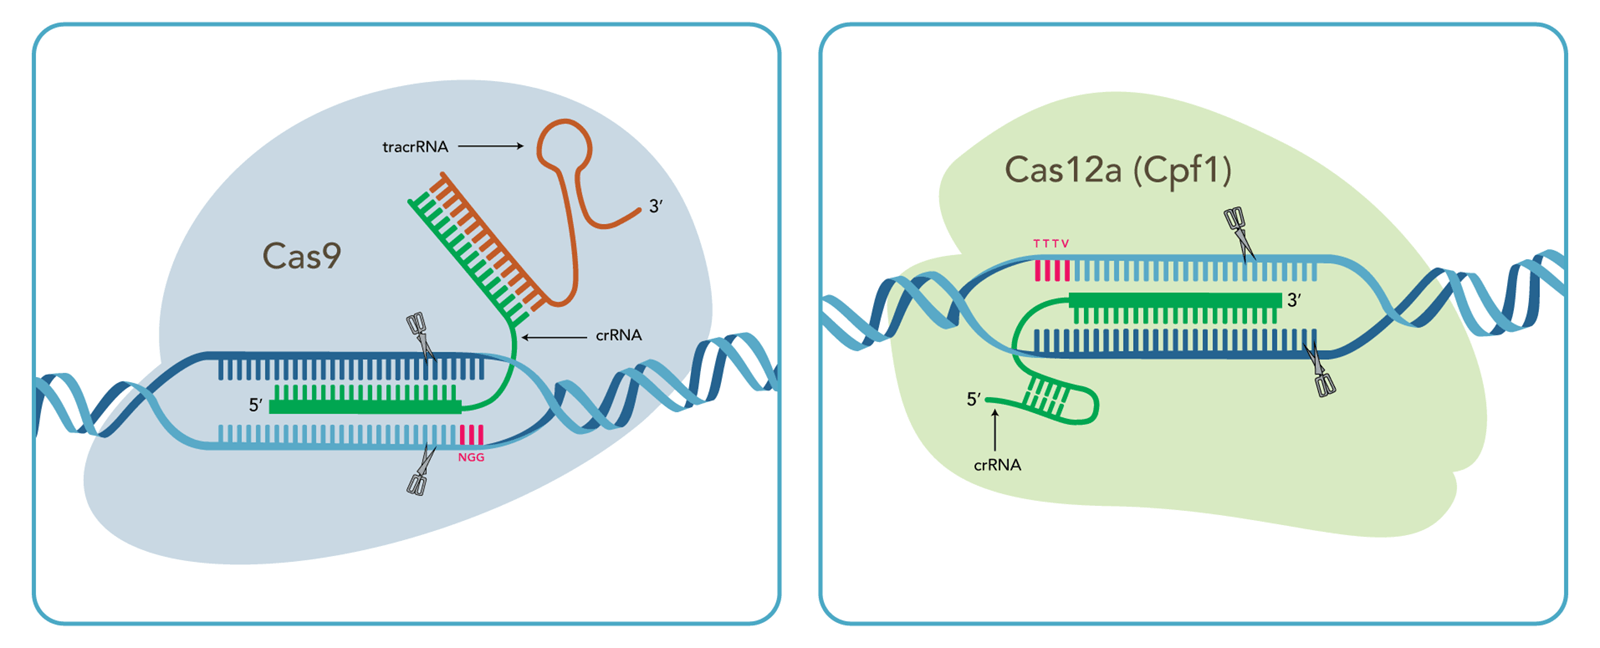 Figures showing difference between Cas9 and Cas12 enzymes